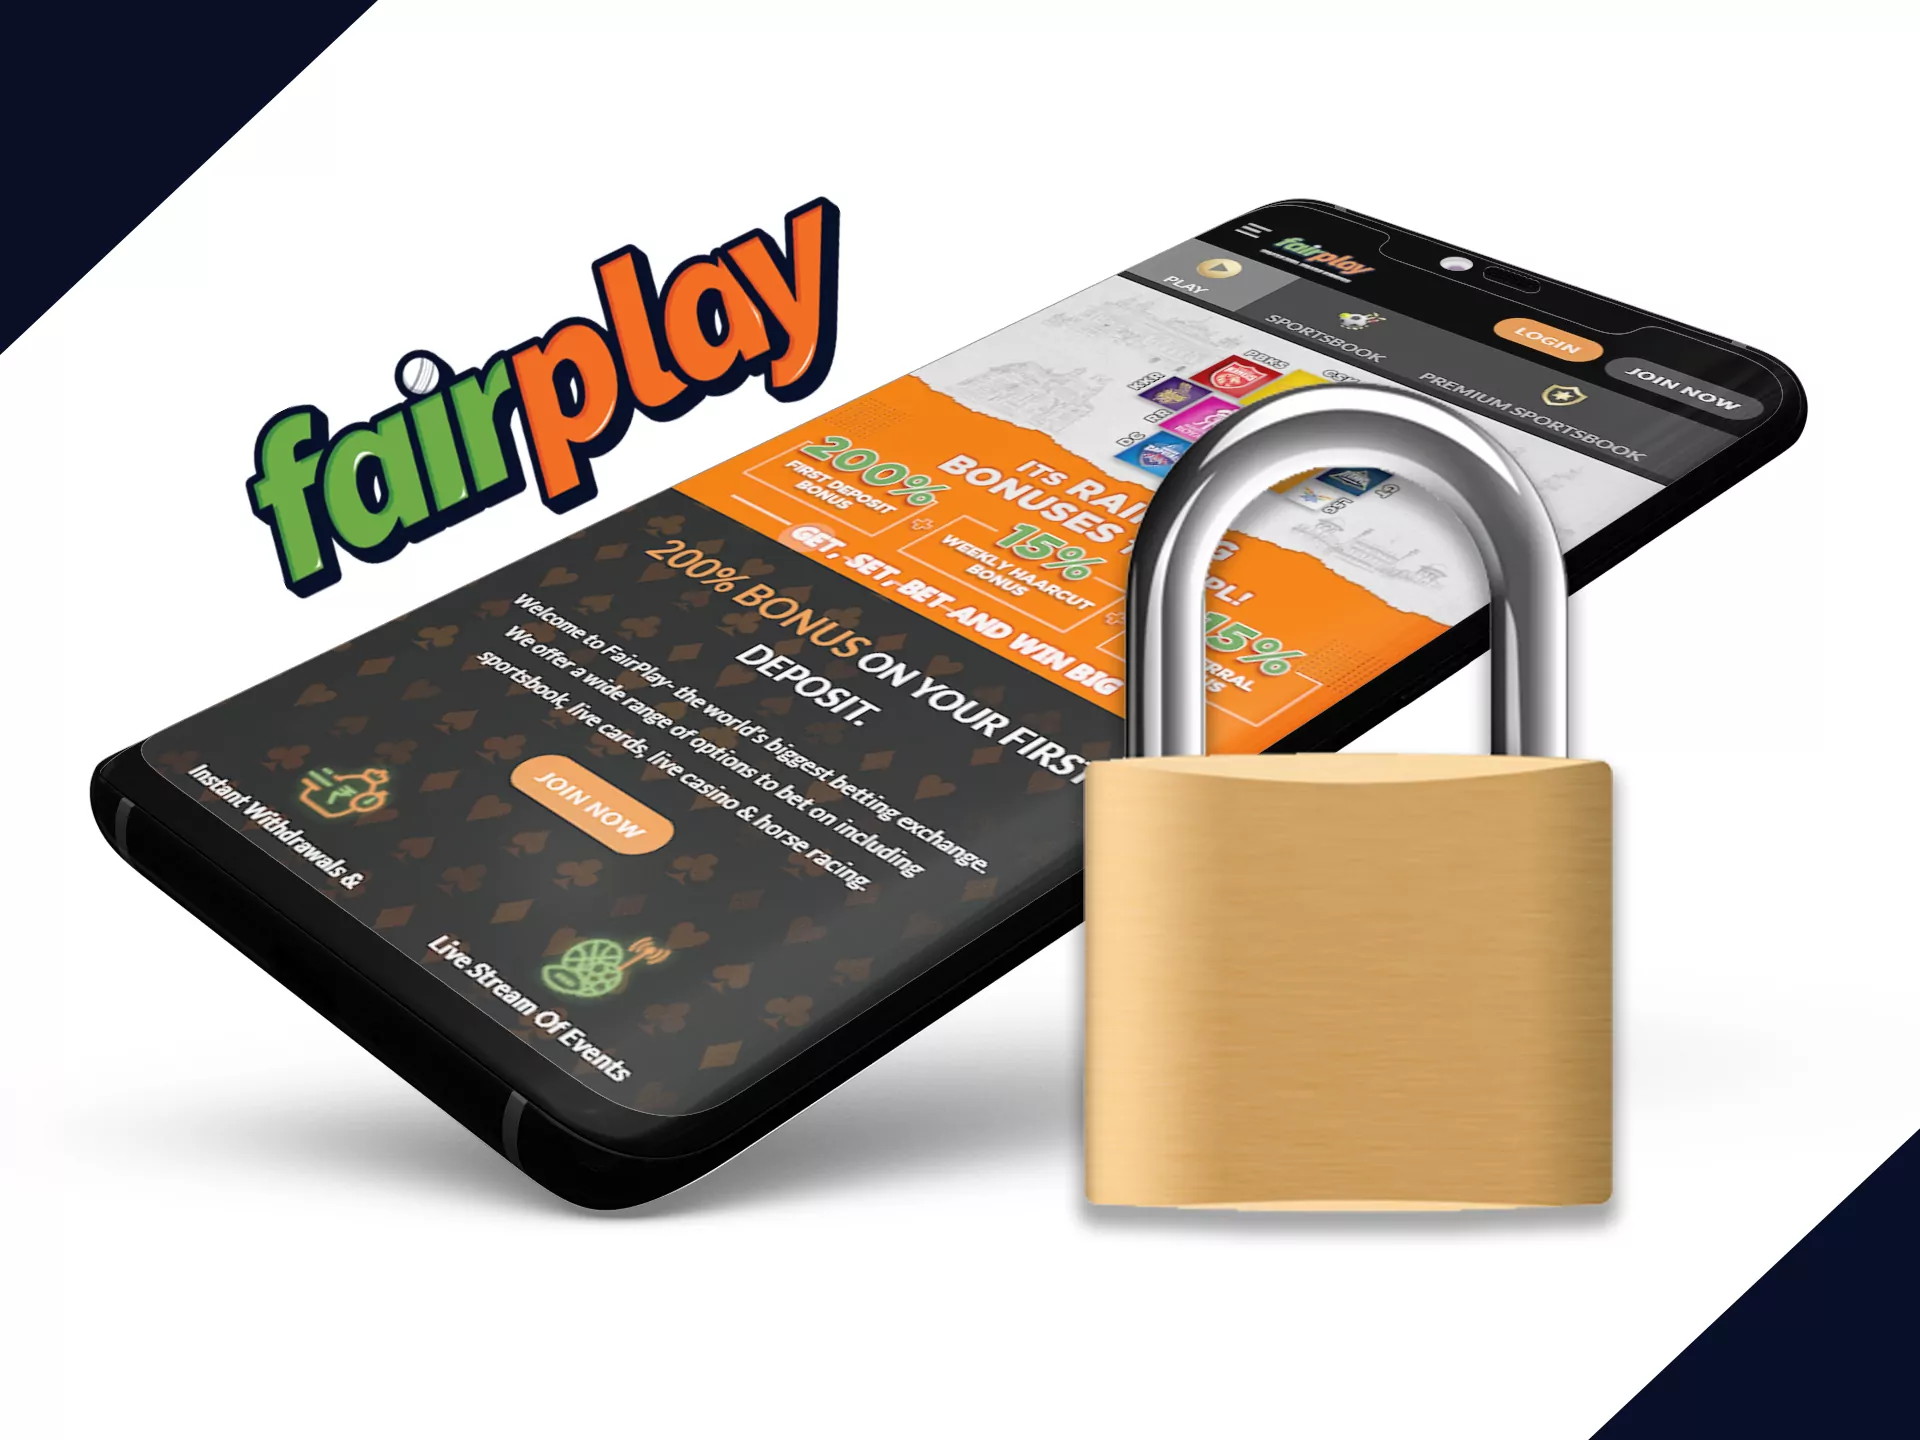 Change security settings for start betting at Fairplay app.